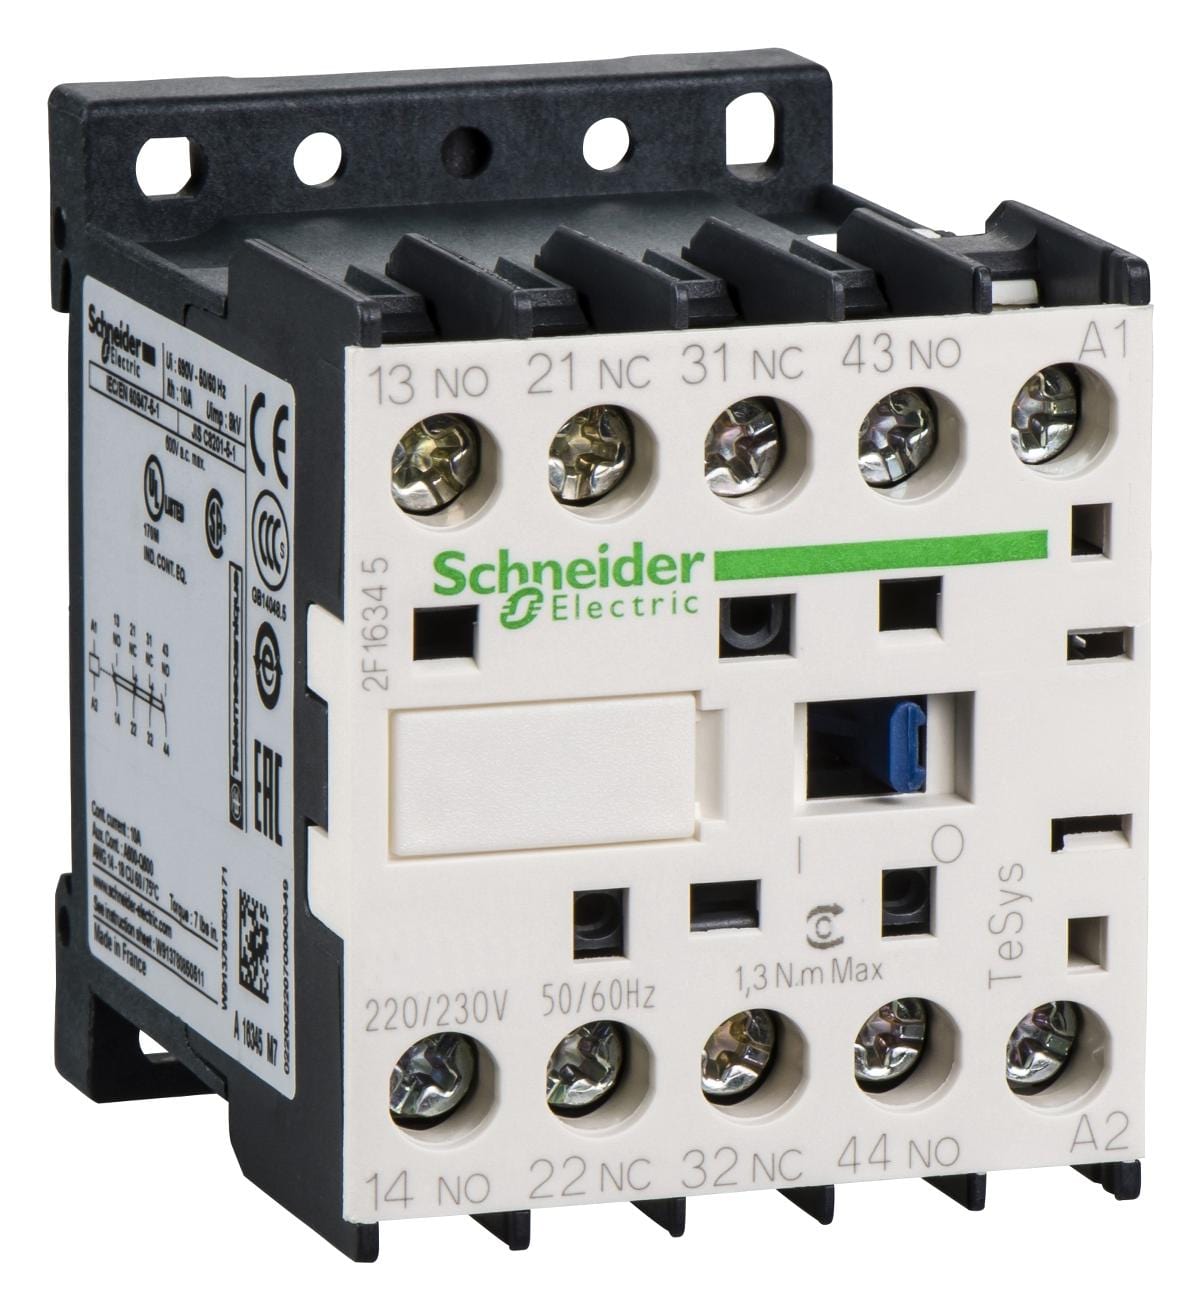 SCHNEIDER ELECTRIC Contactors LC1KT20B7S335 TESYS K 4P AC3 440V 20A COIL 2 SCHNEIDER ELECTRIC 3408274 LC1KT20B7S335